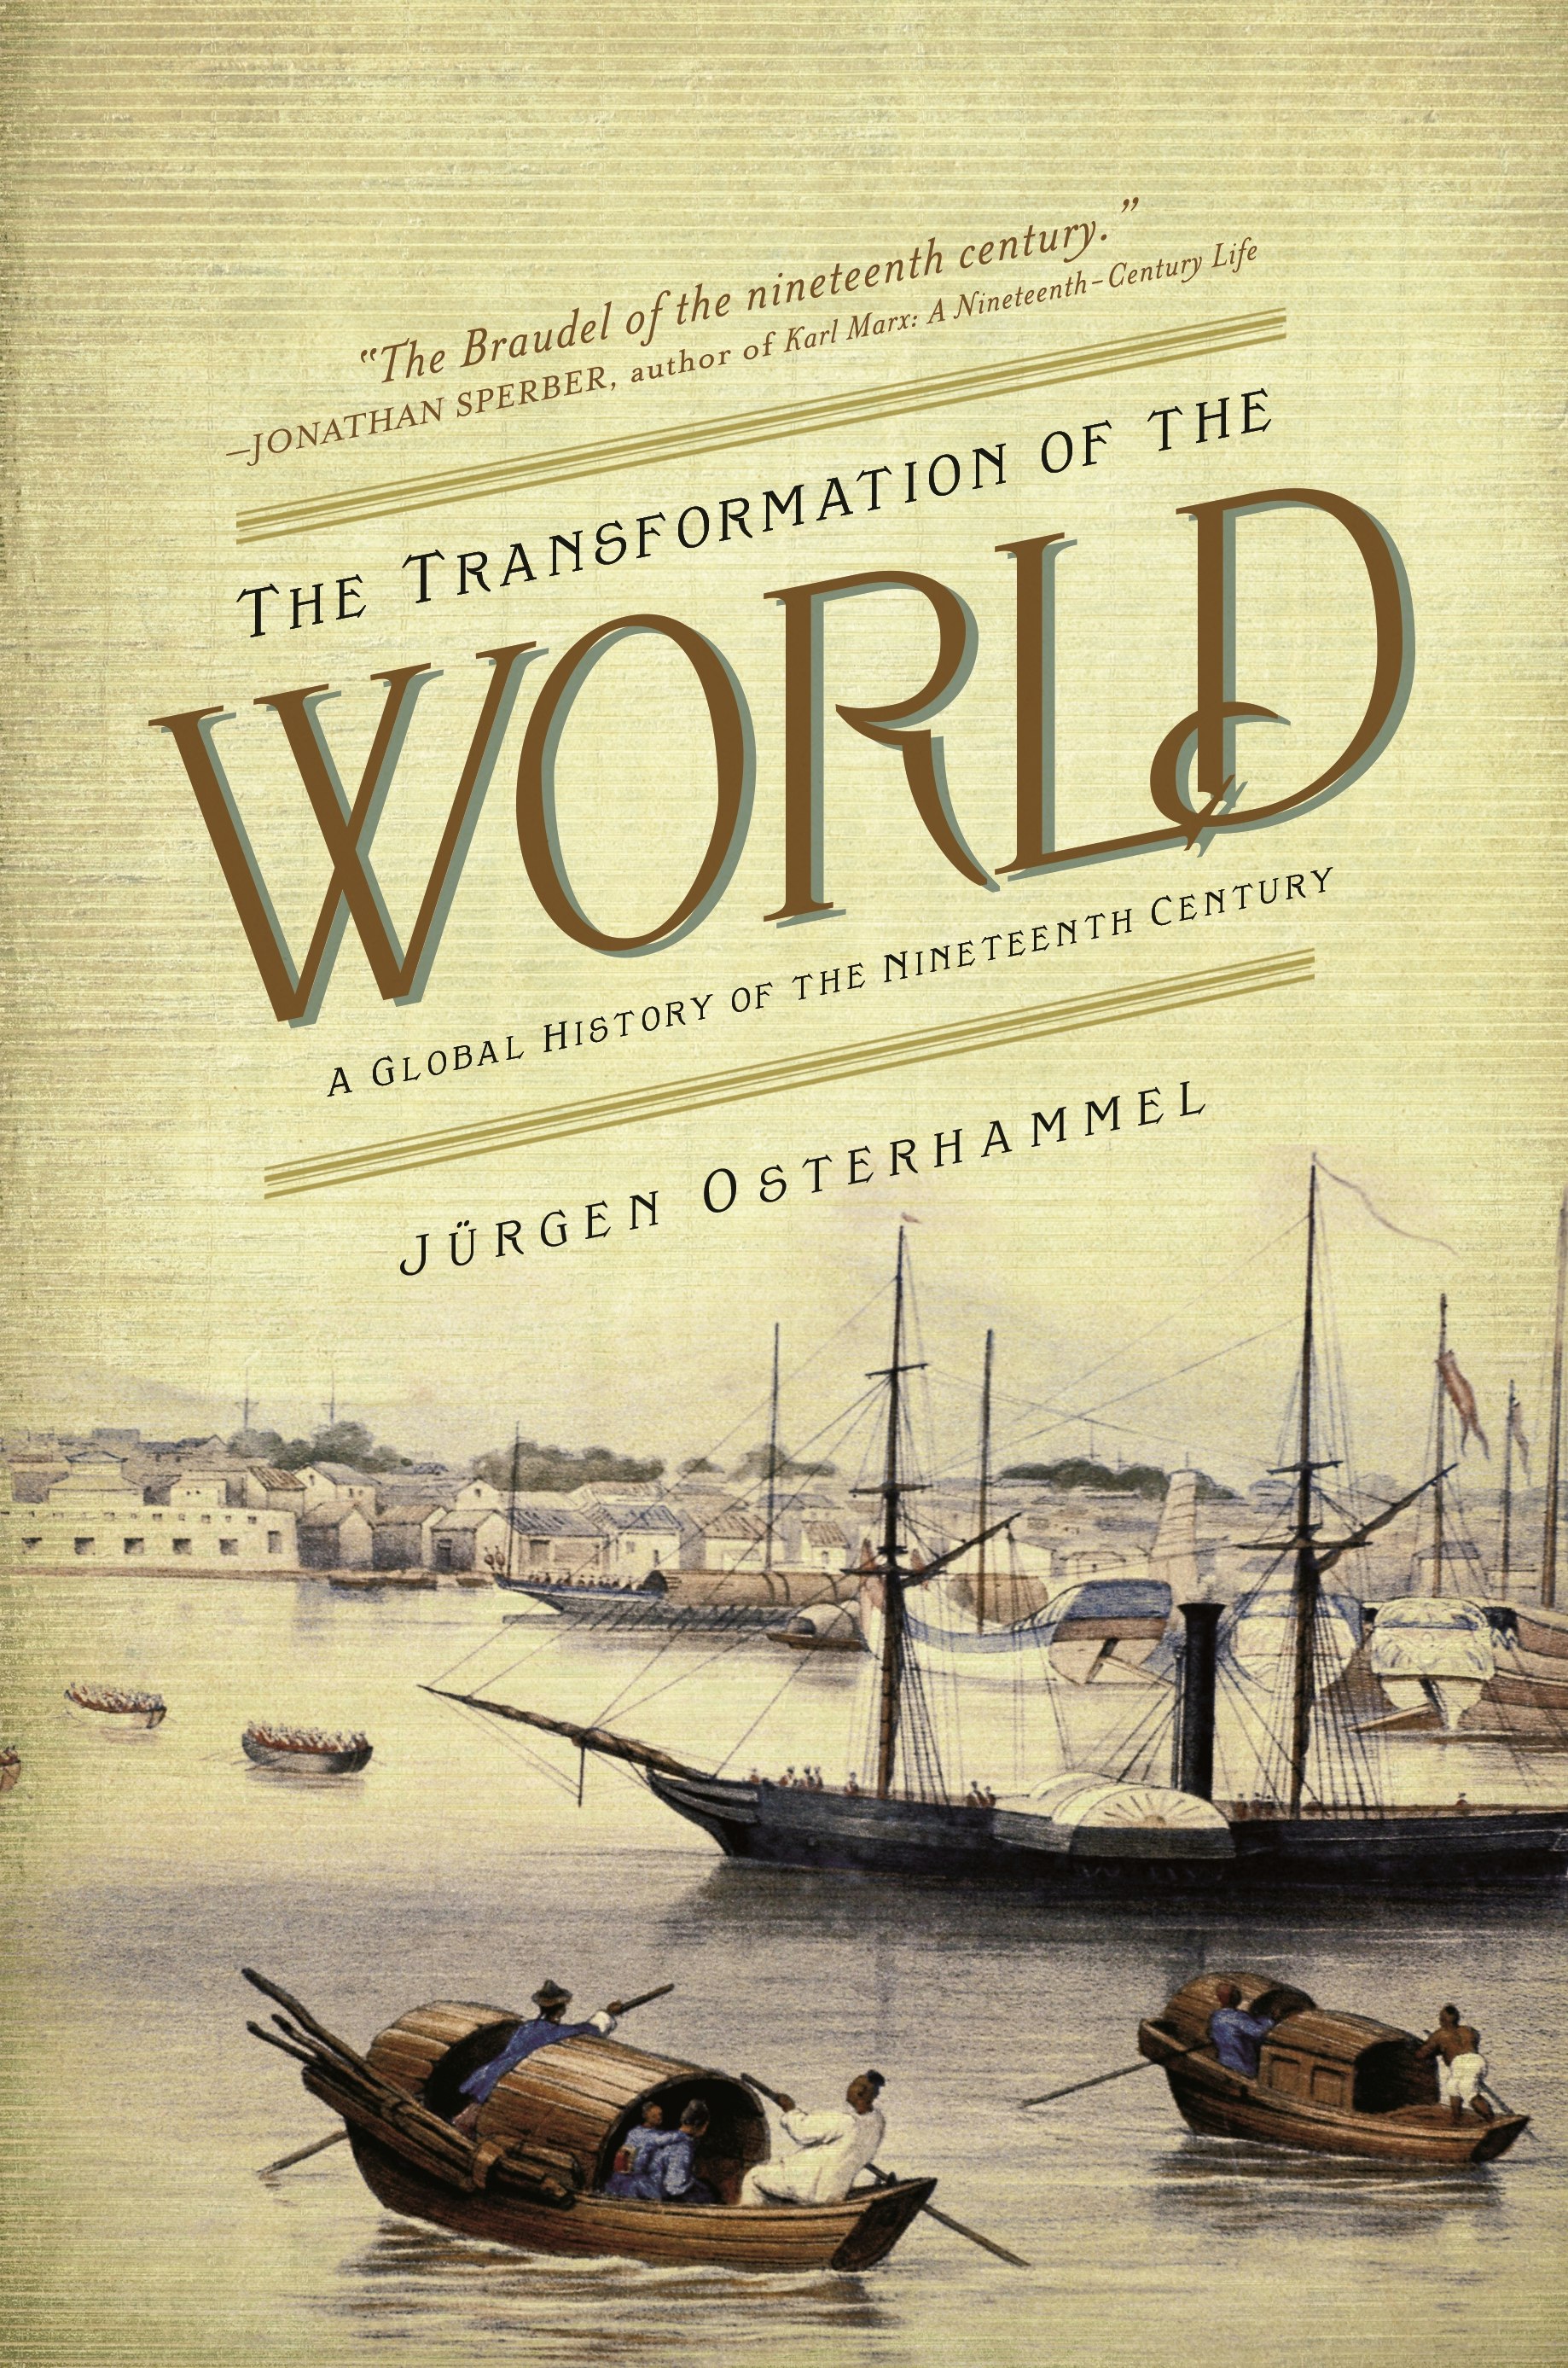 of　World:　the　A　Nineteenth　the　Global　History　of　Century　The　Transformation